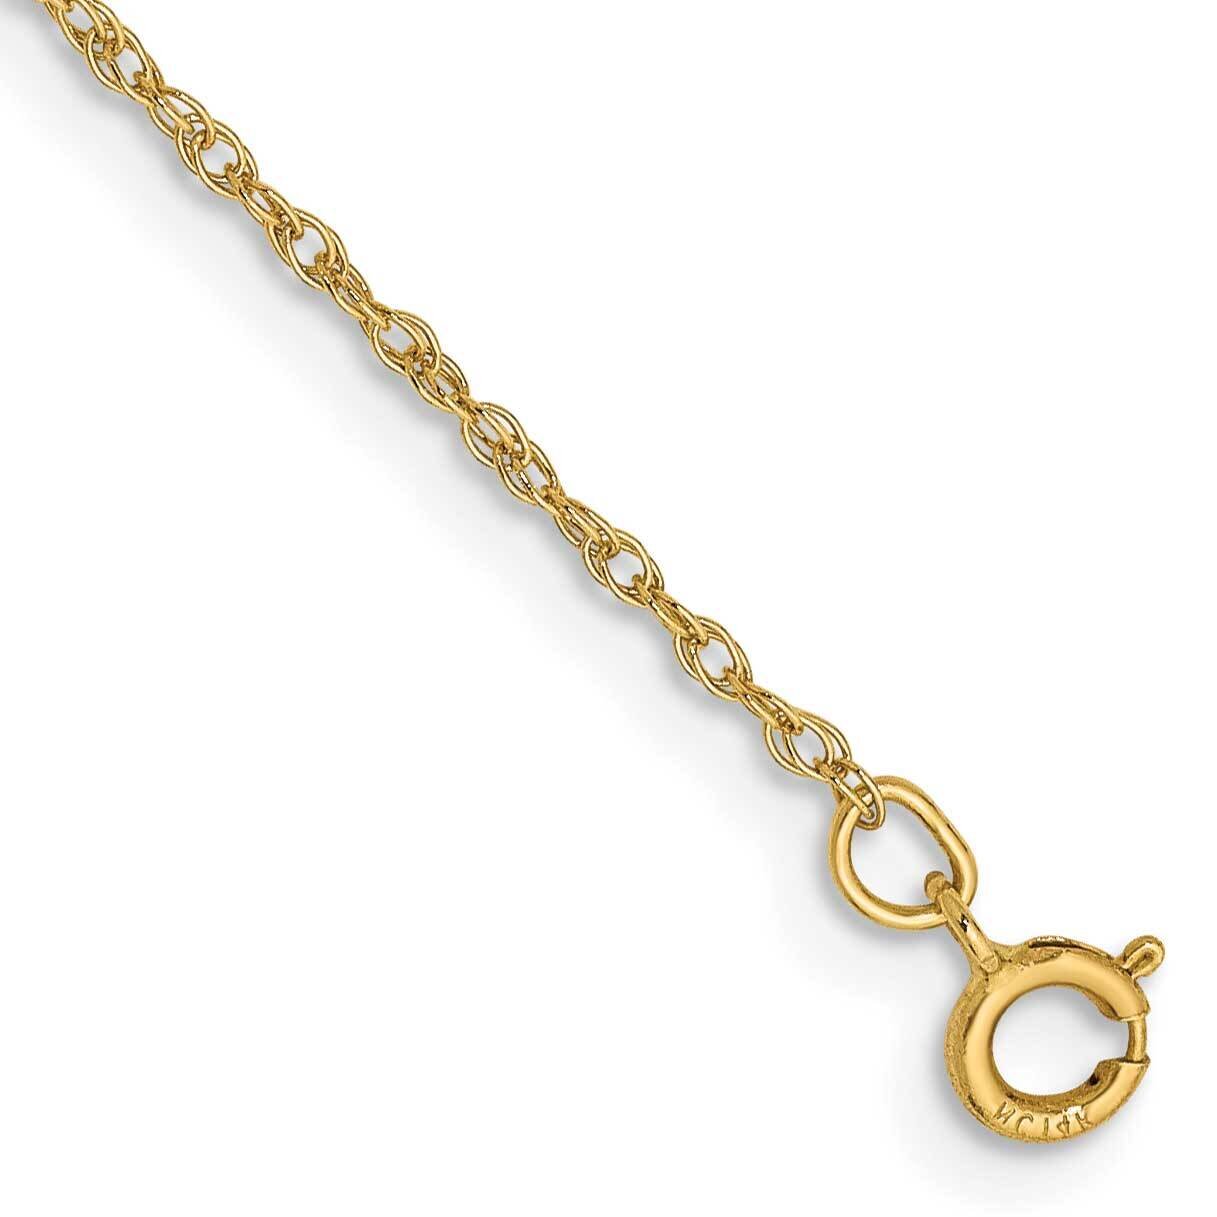 5.5 Inch .8mm Light Baby Rope with Spring Ring Clasp Chain 14k Gold PEN3-5.5